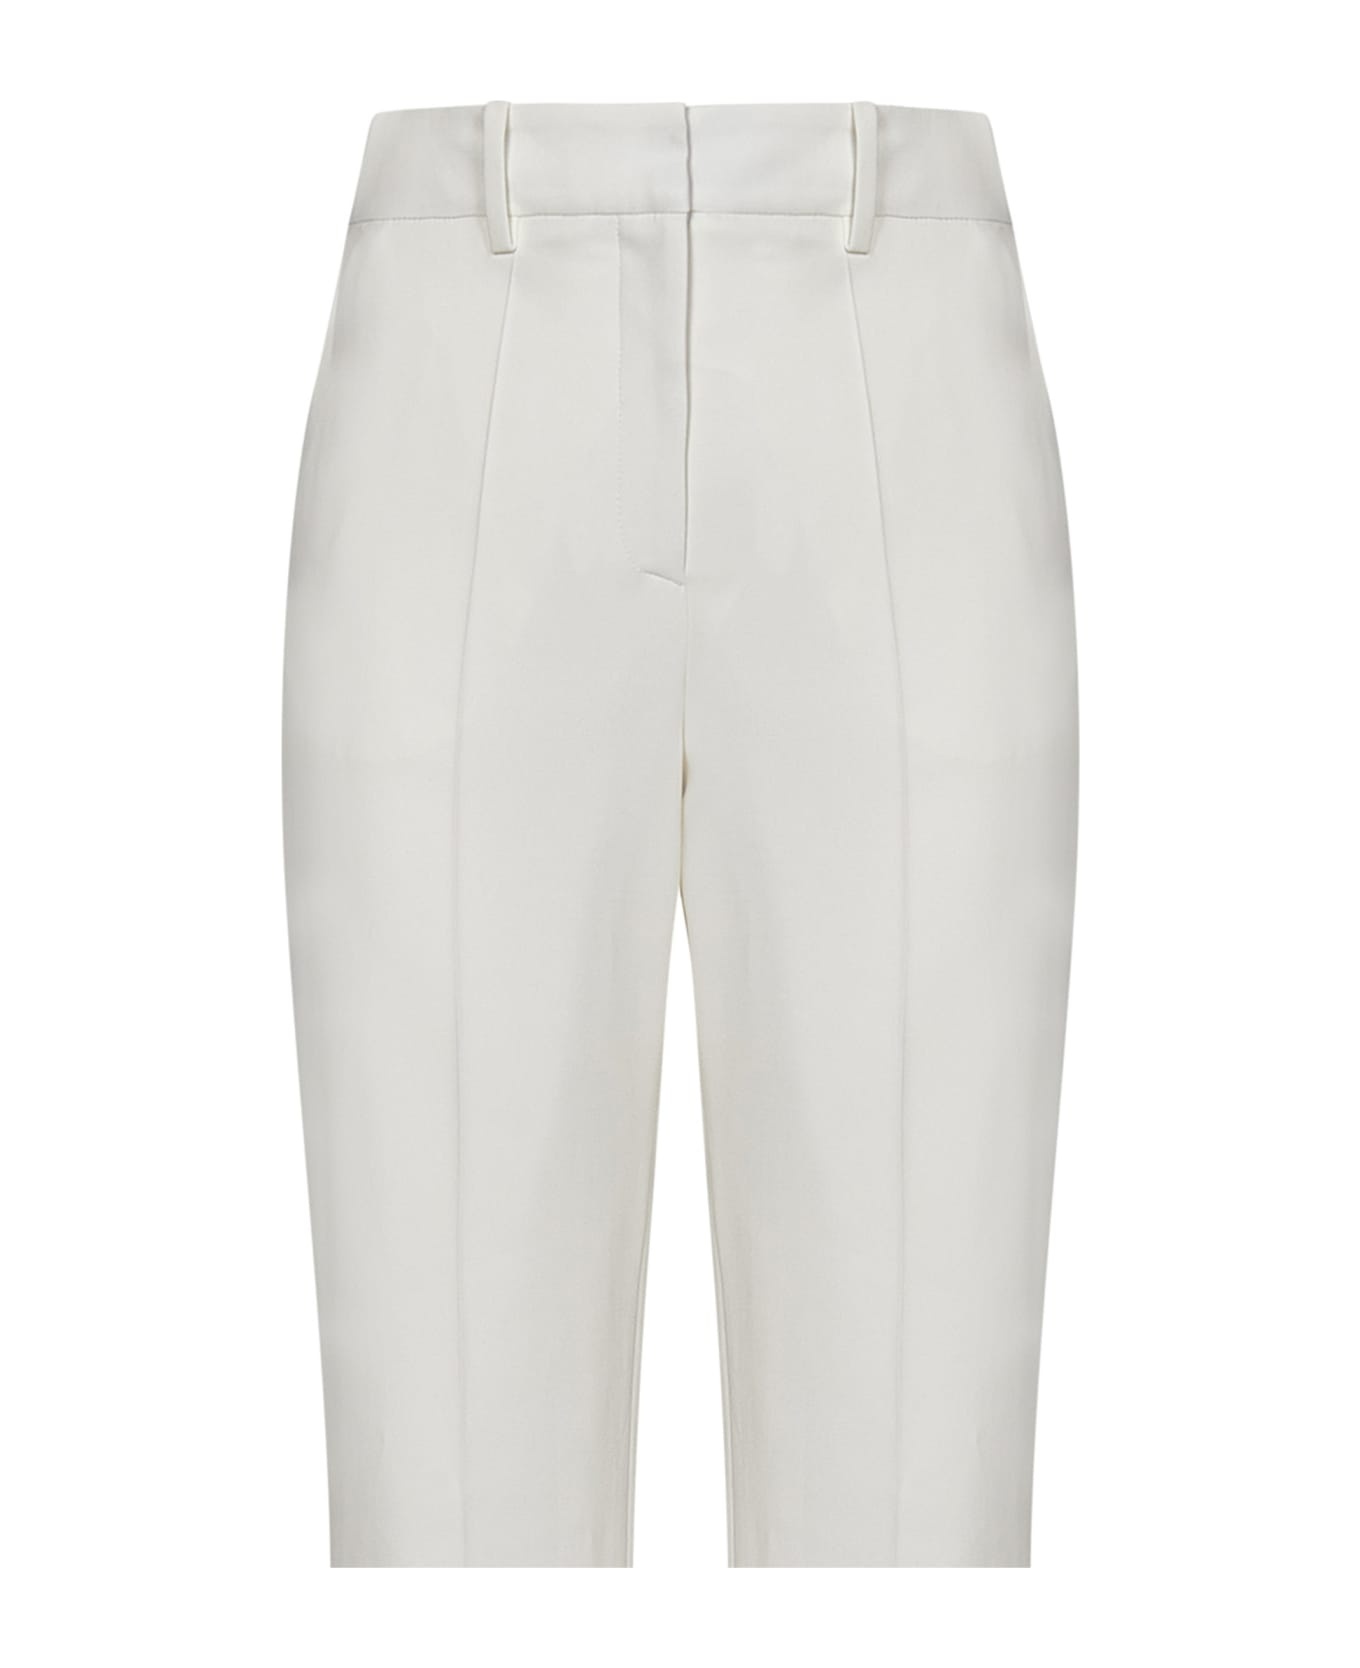 White Viscose Blend Trousers - 3